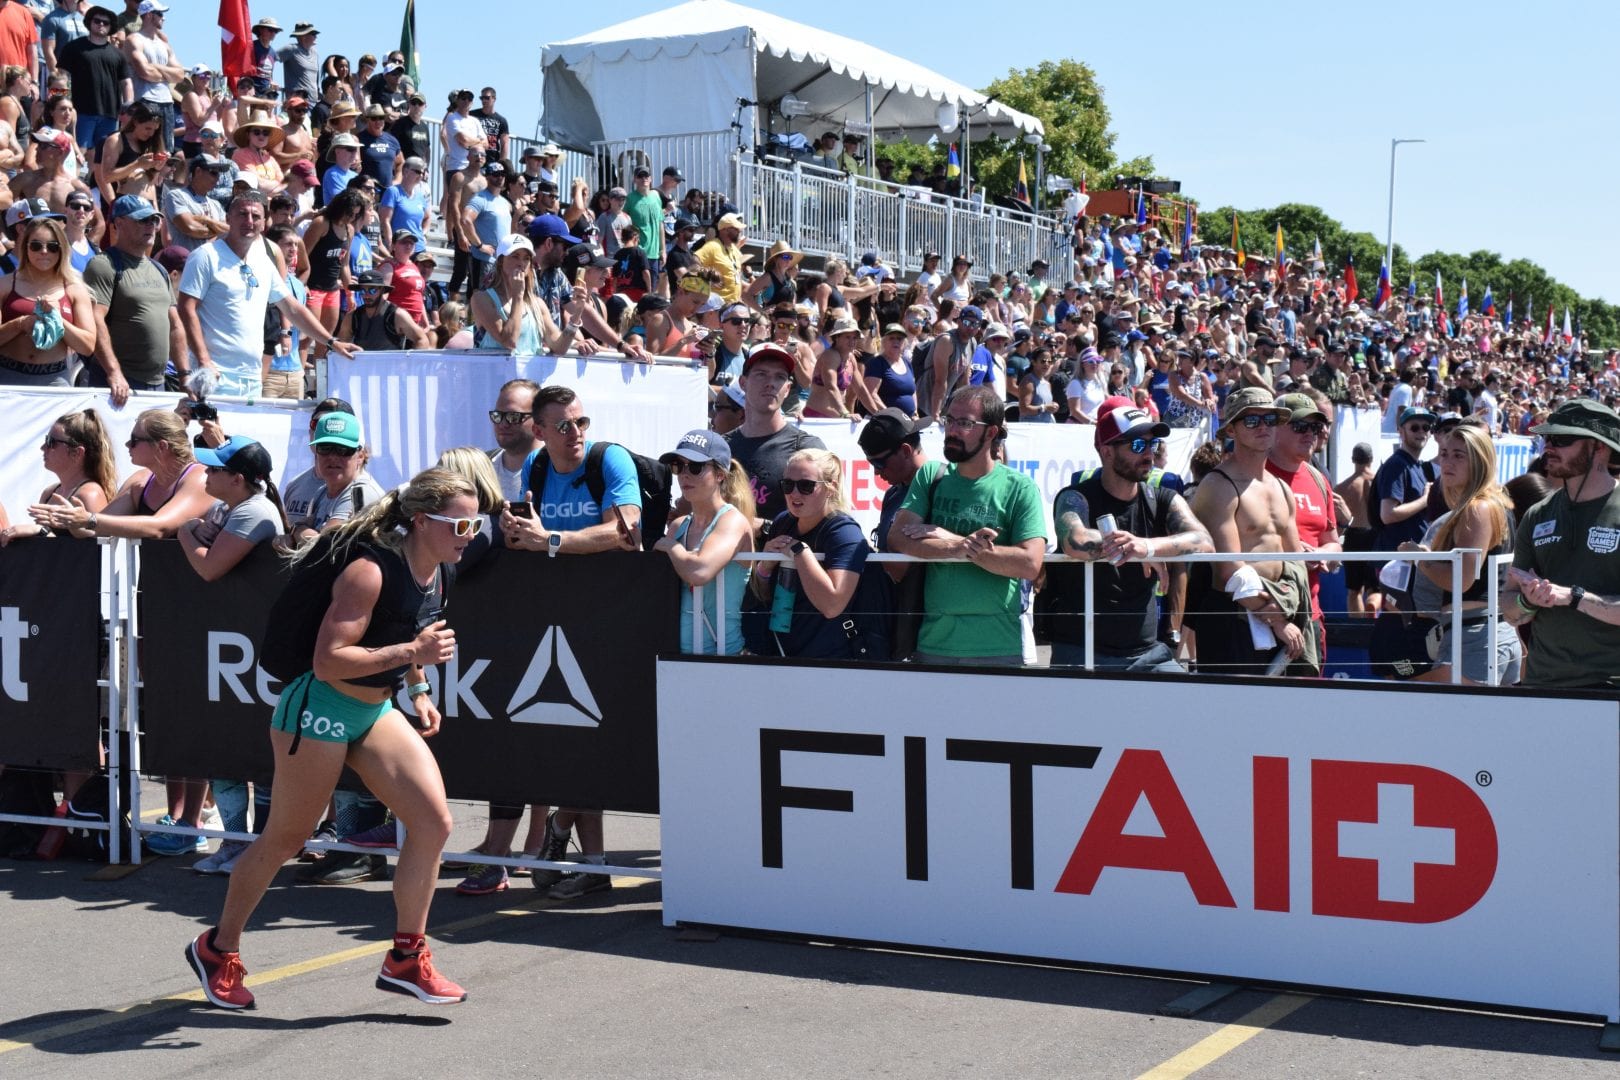 Madeline Sturt completes the Ruck Run event at the 2019 CrossFit Games.